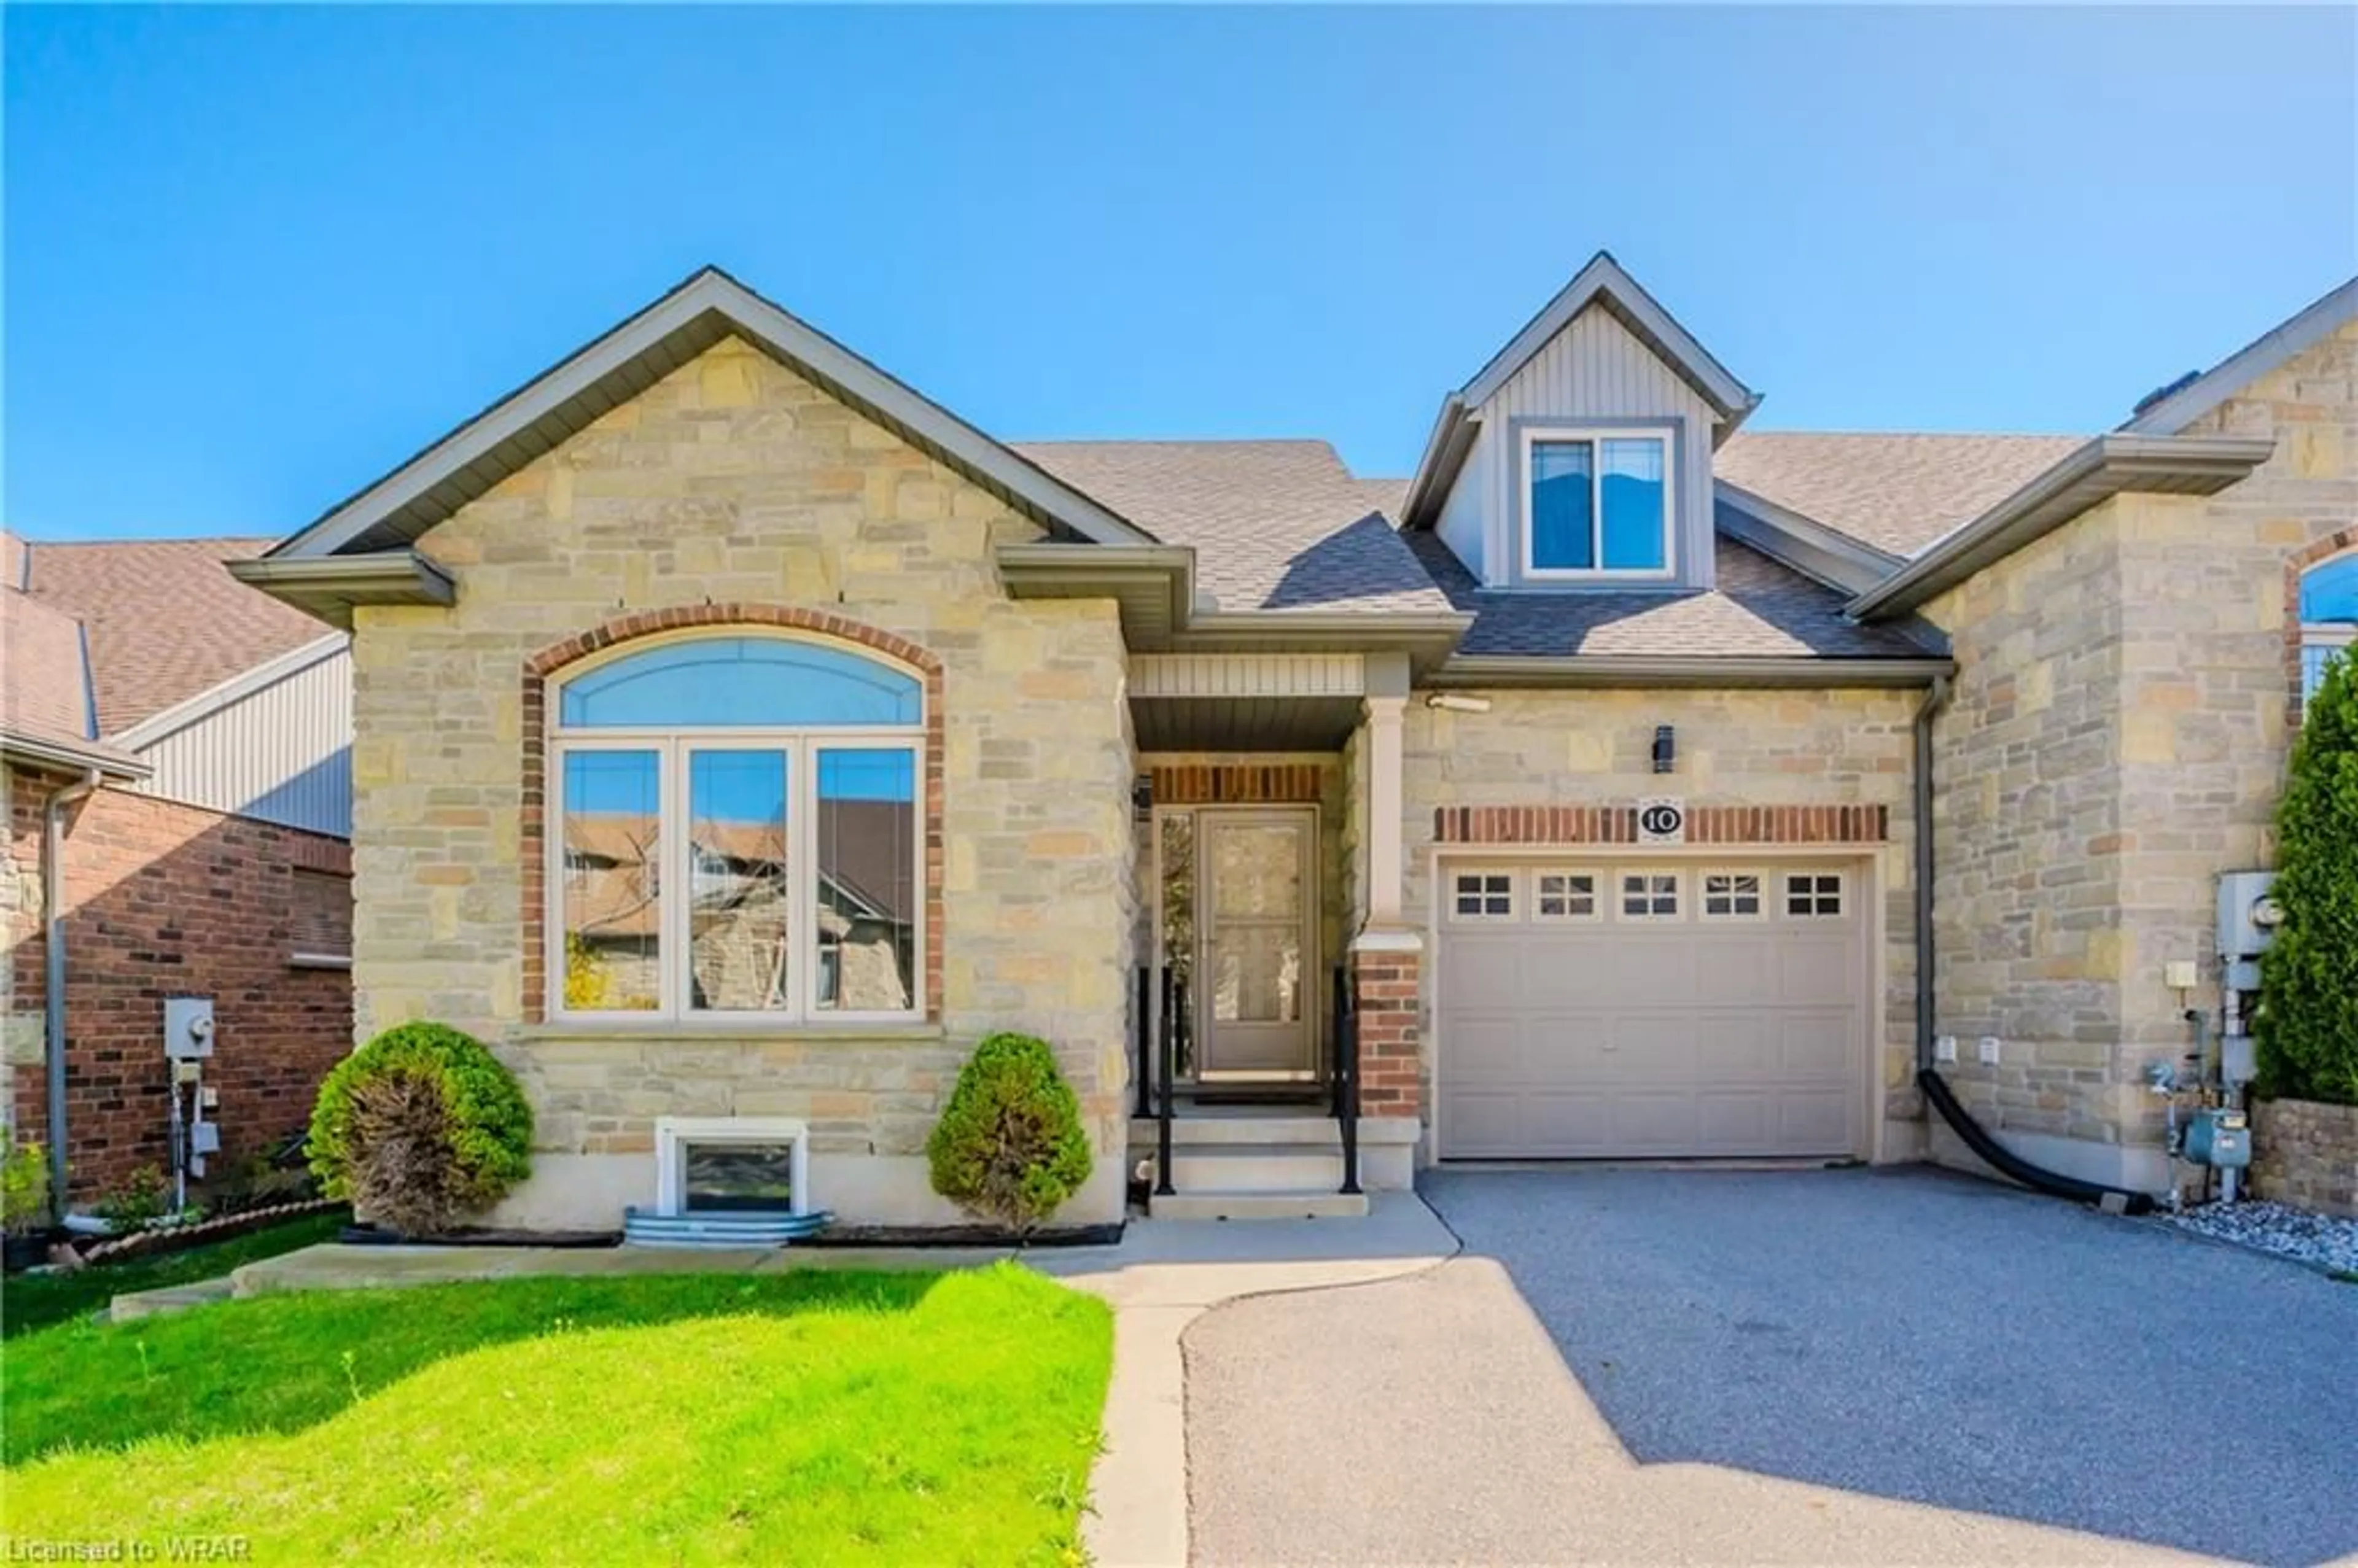 Home with brick exterior material for 10 Booty Lane, Cambridge Ontario N1R 8P5